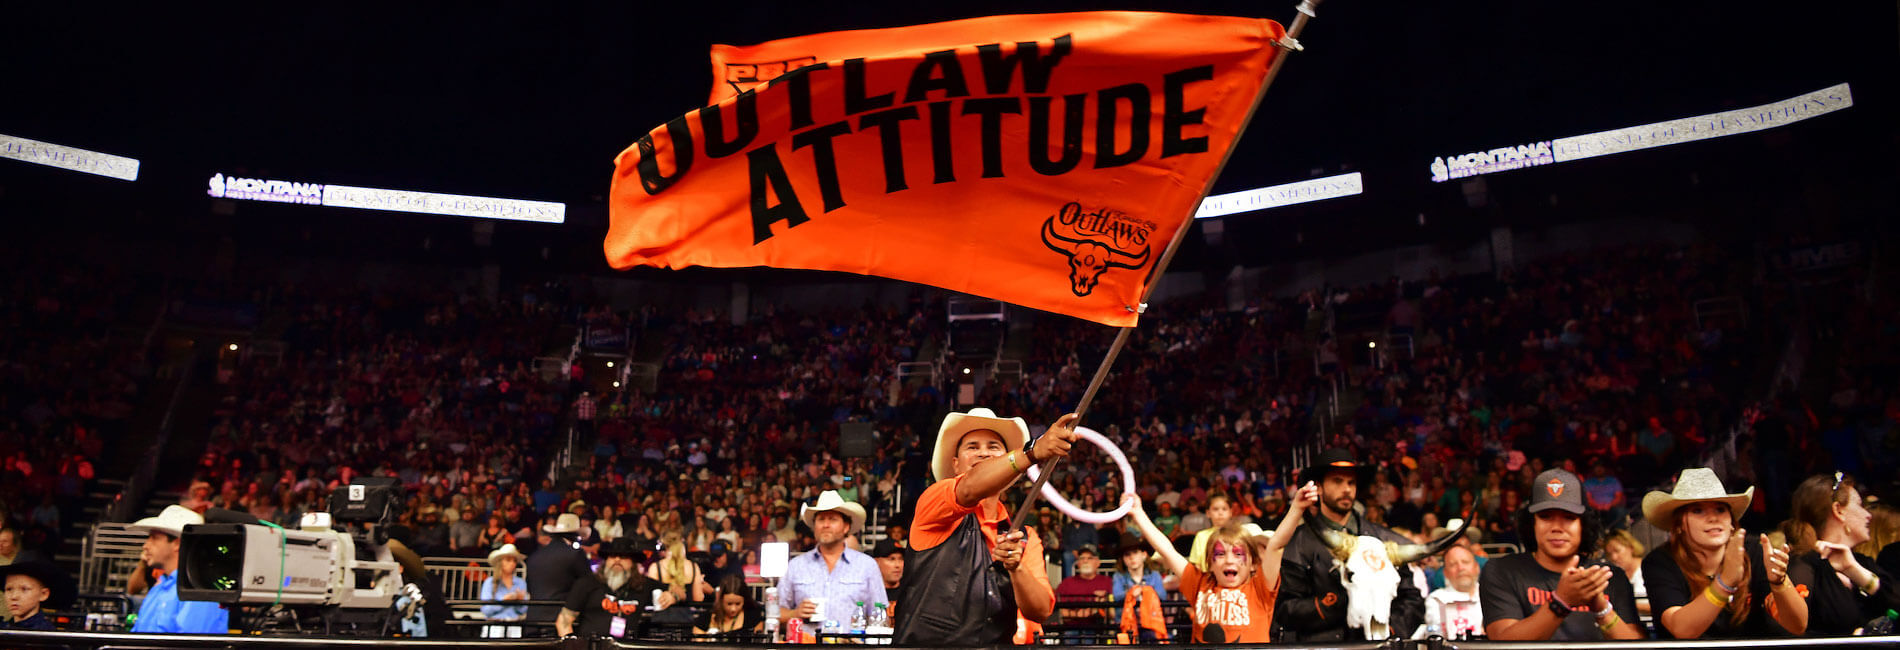 KC Outlaw Banner waving with the slogan Outlaw Attitude.